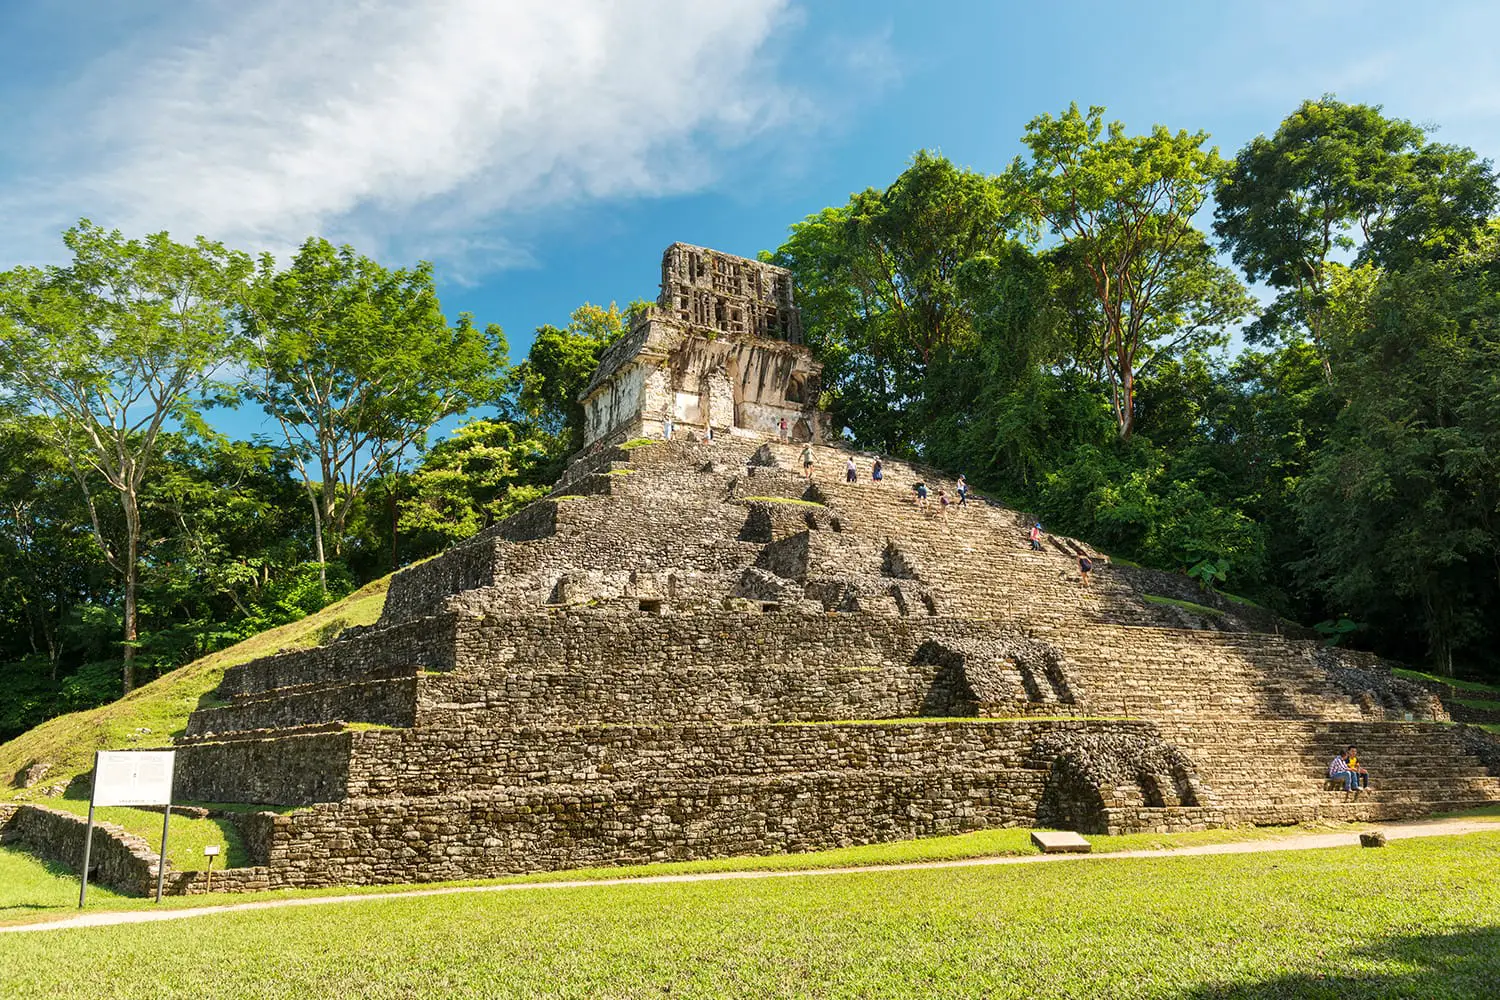 Unknown people explore the mayan temple ruins surrounded by dense jungle in Palenque Mexico